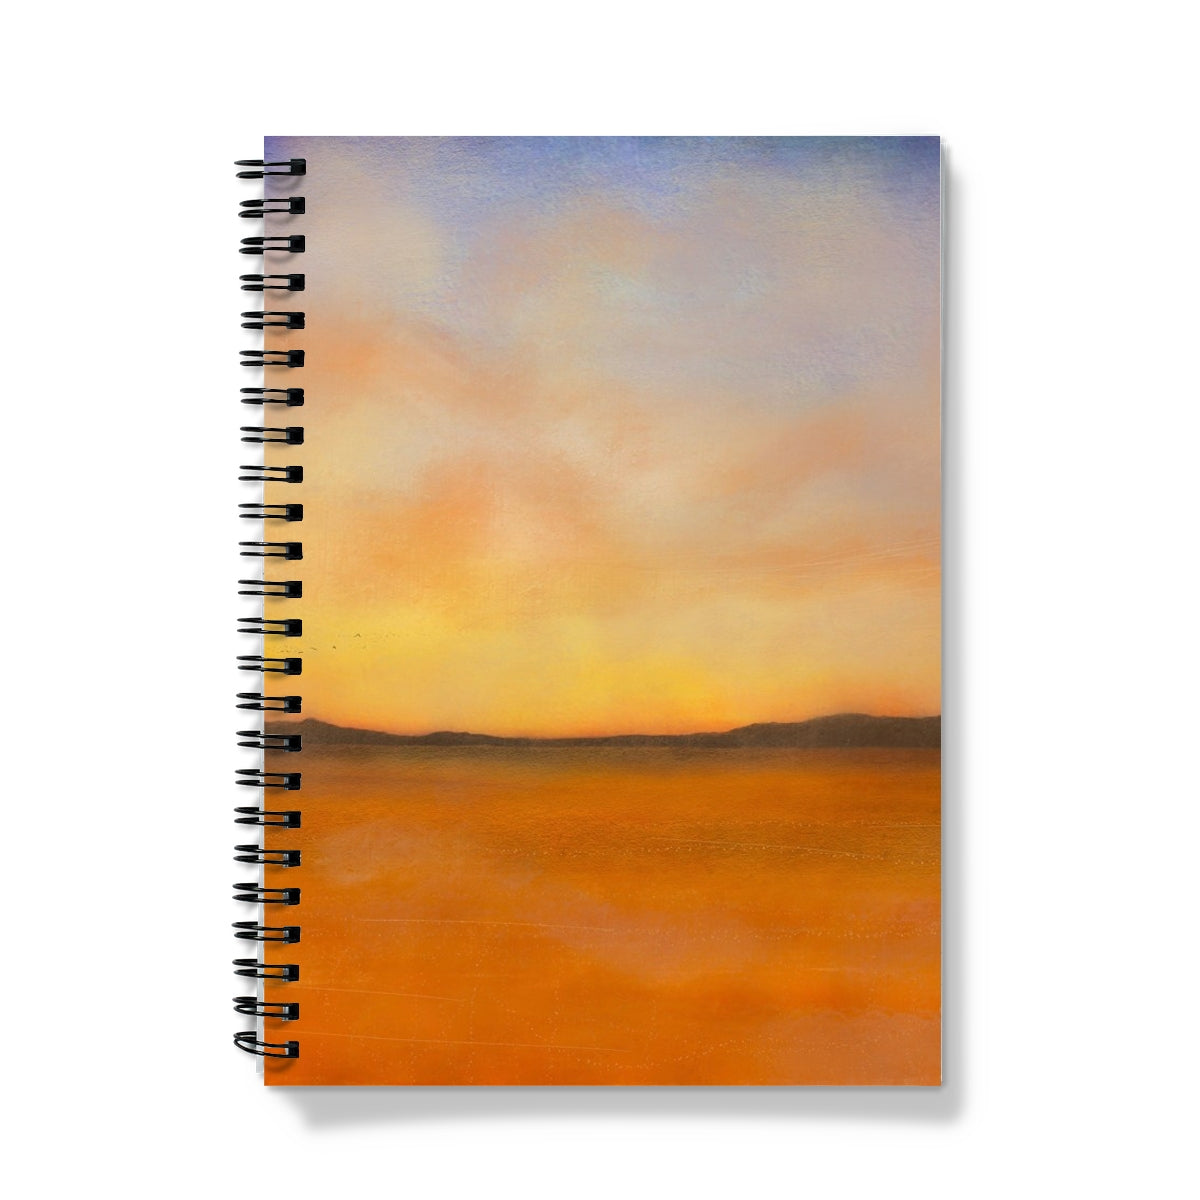 Islay Dawn Art Gifts Notebook-Journals & Notebooks-Hebridean Islands Art Gallery-A4-Graph-Paintings, Prints, Homeware, Art Gifts From Scotland By Scottish Artist Kevin Hunter